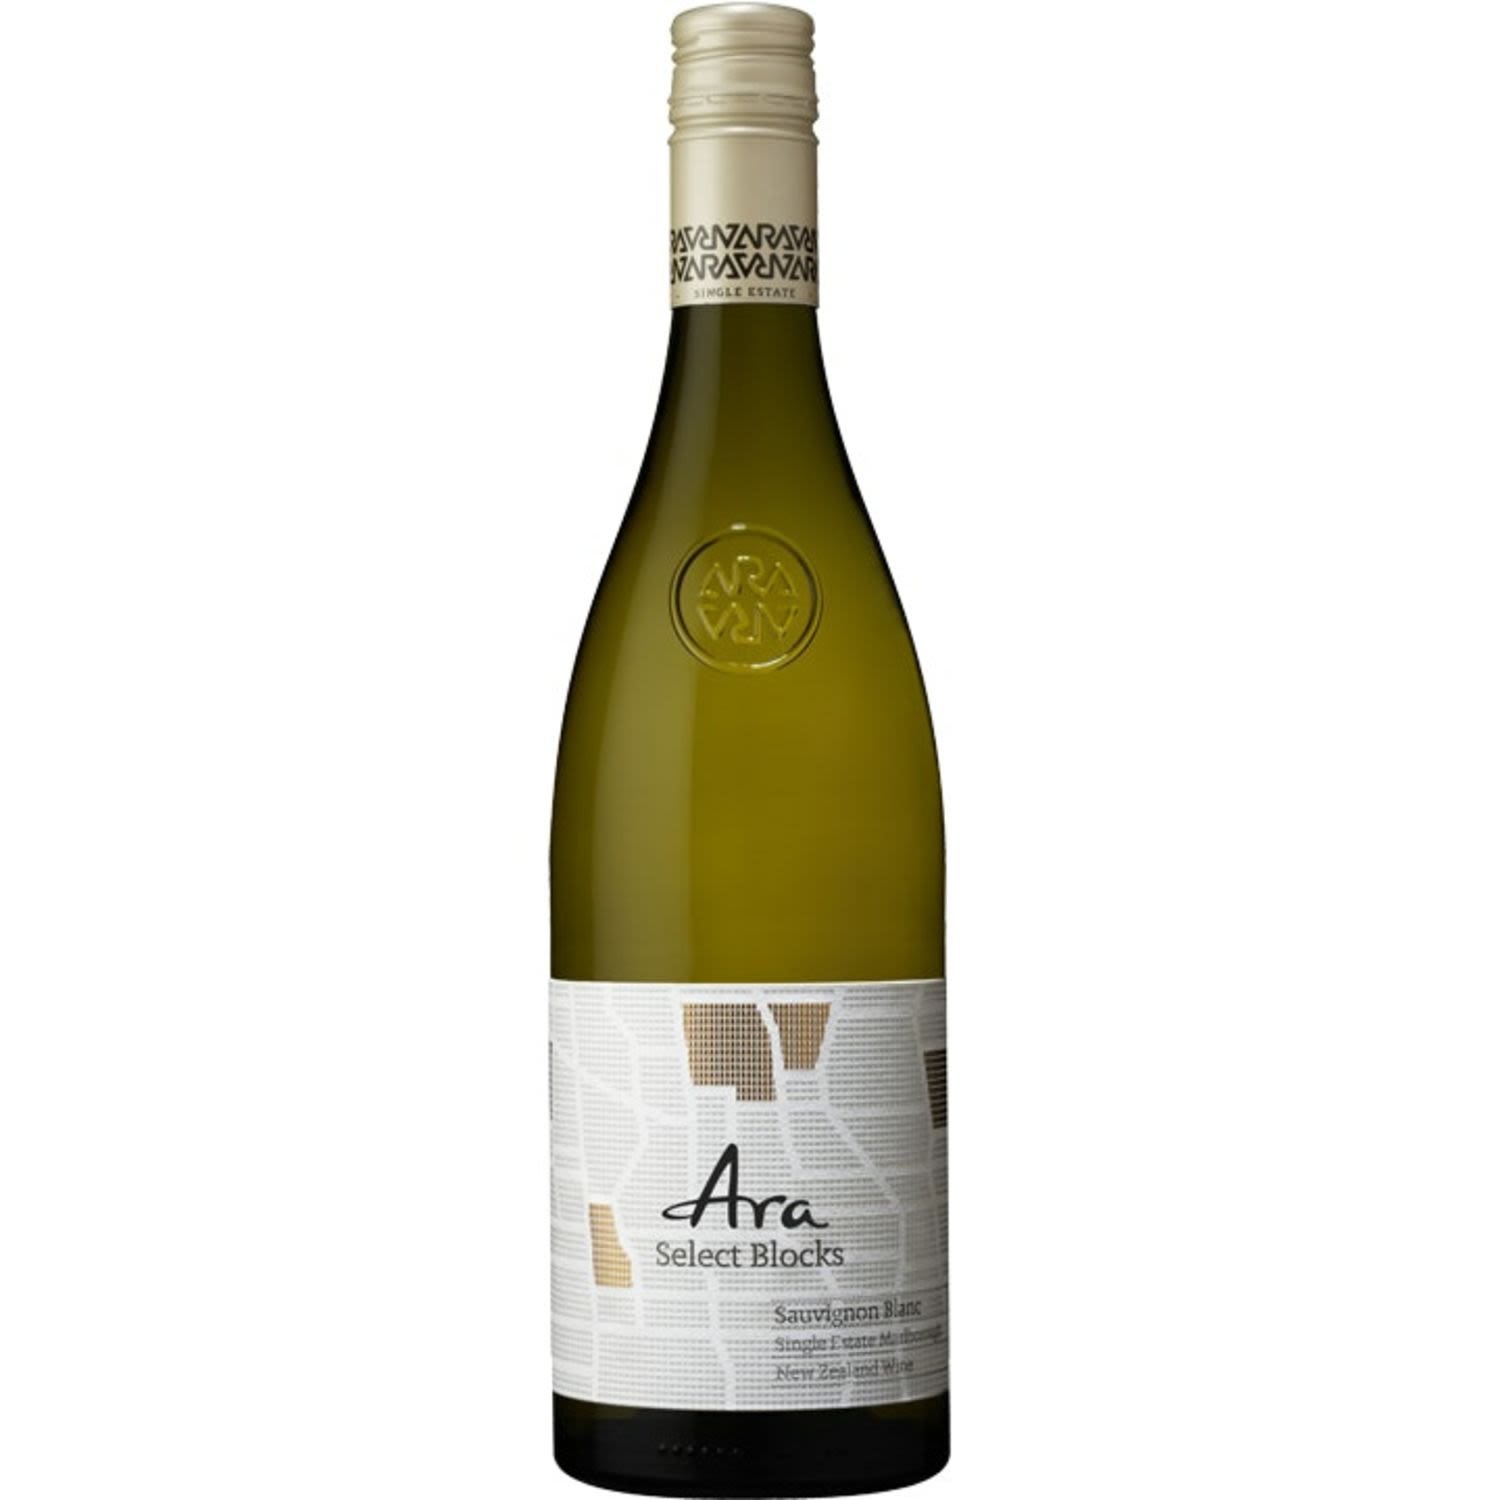 The Ara Select Blocks Sauvignon Blanc is vibrant and intense, showing ripe, clean stone and grapefruit characters. It is very concentrated with a generous, textured mouth feel and a long clean finish.<br /> <br />Alcohol Volume: 12.50%<br /><br />Pack Format: Bottle<br /><br />Standard Drinks: 7.4</br /><br />Pack Type: Bottle<br /><br />Country of Origin: New Zealand<br /><br />Region: Marlborough<br /><br />Vintage: Vintages Vary<br />